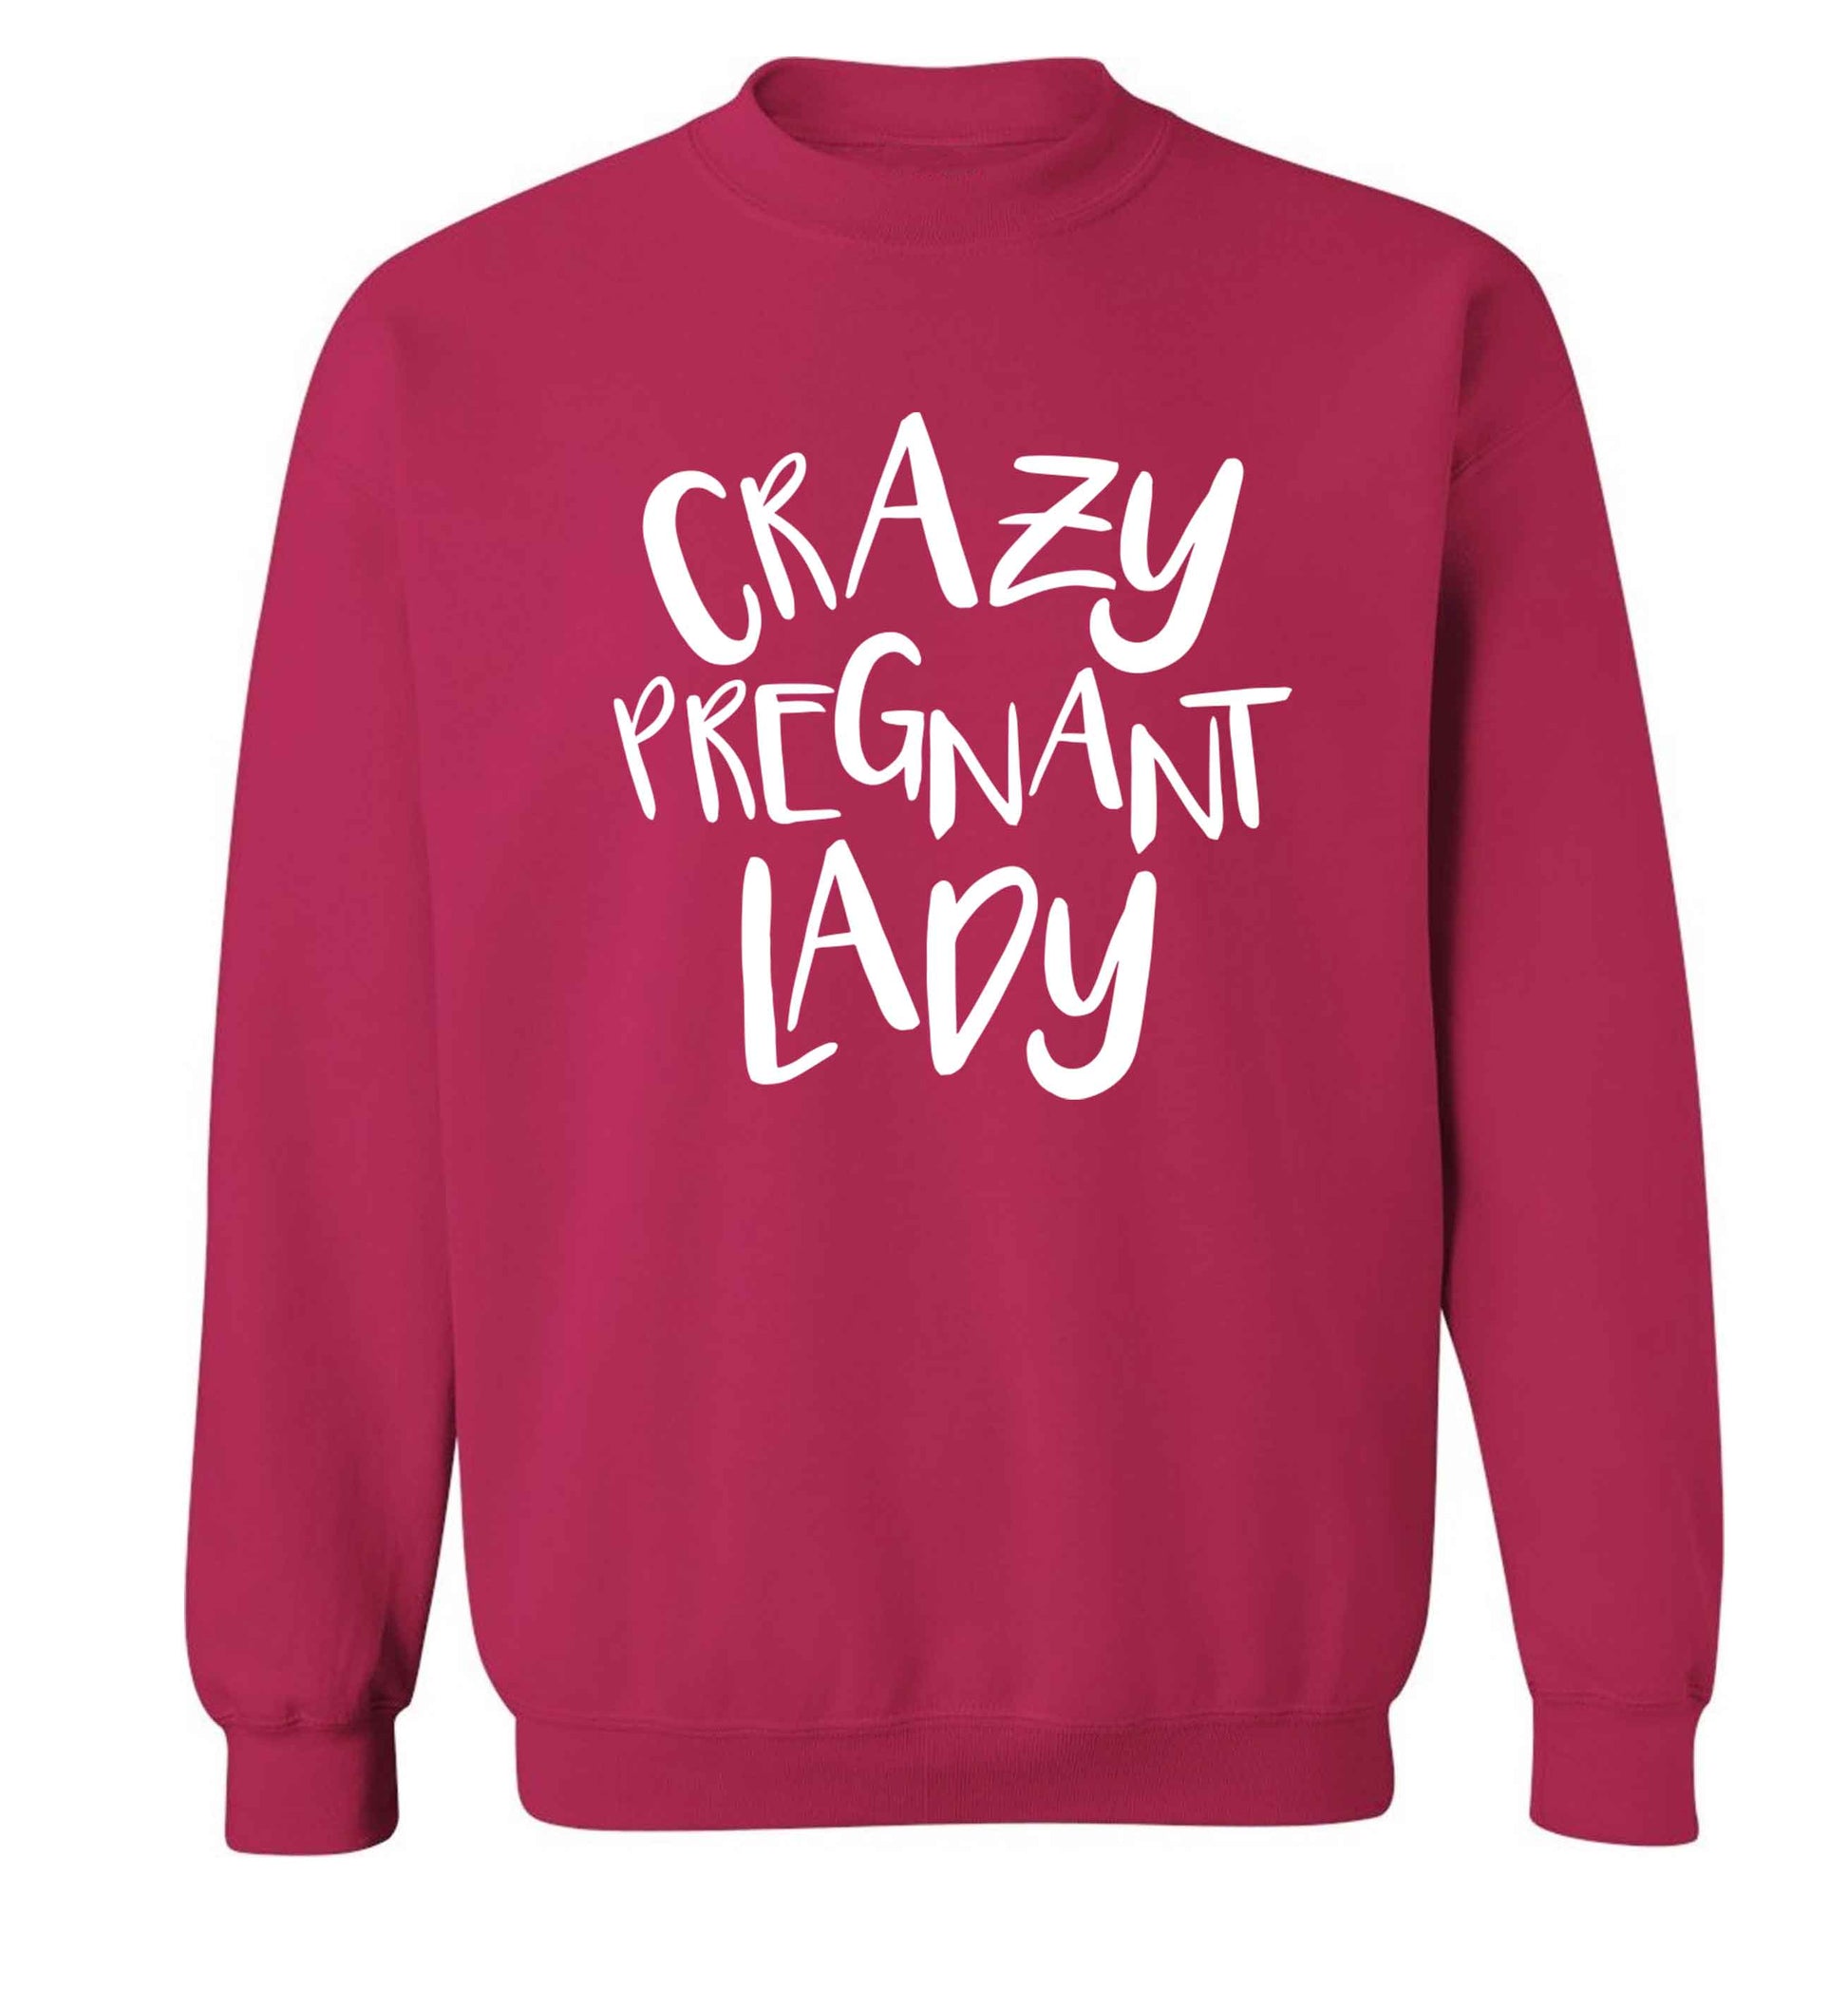 Crazy pregnant lady Adult's unisex pink Sweater 2XL